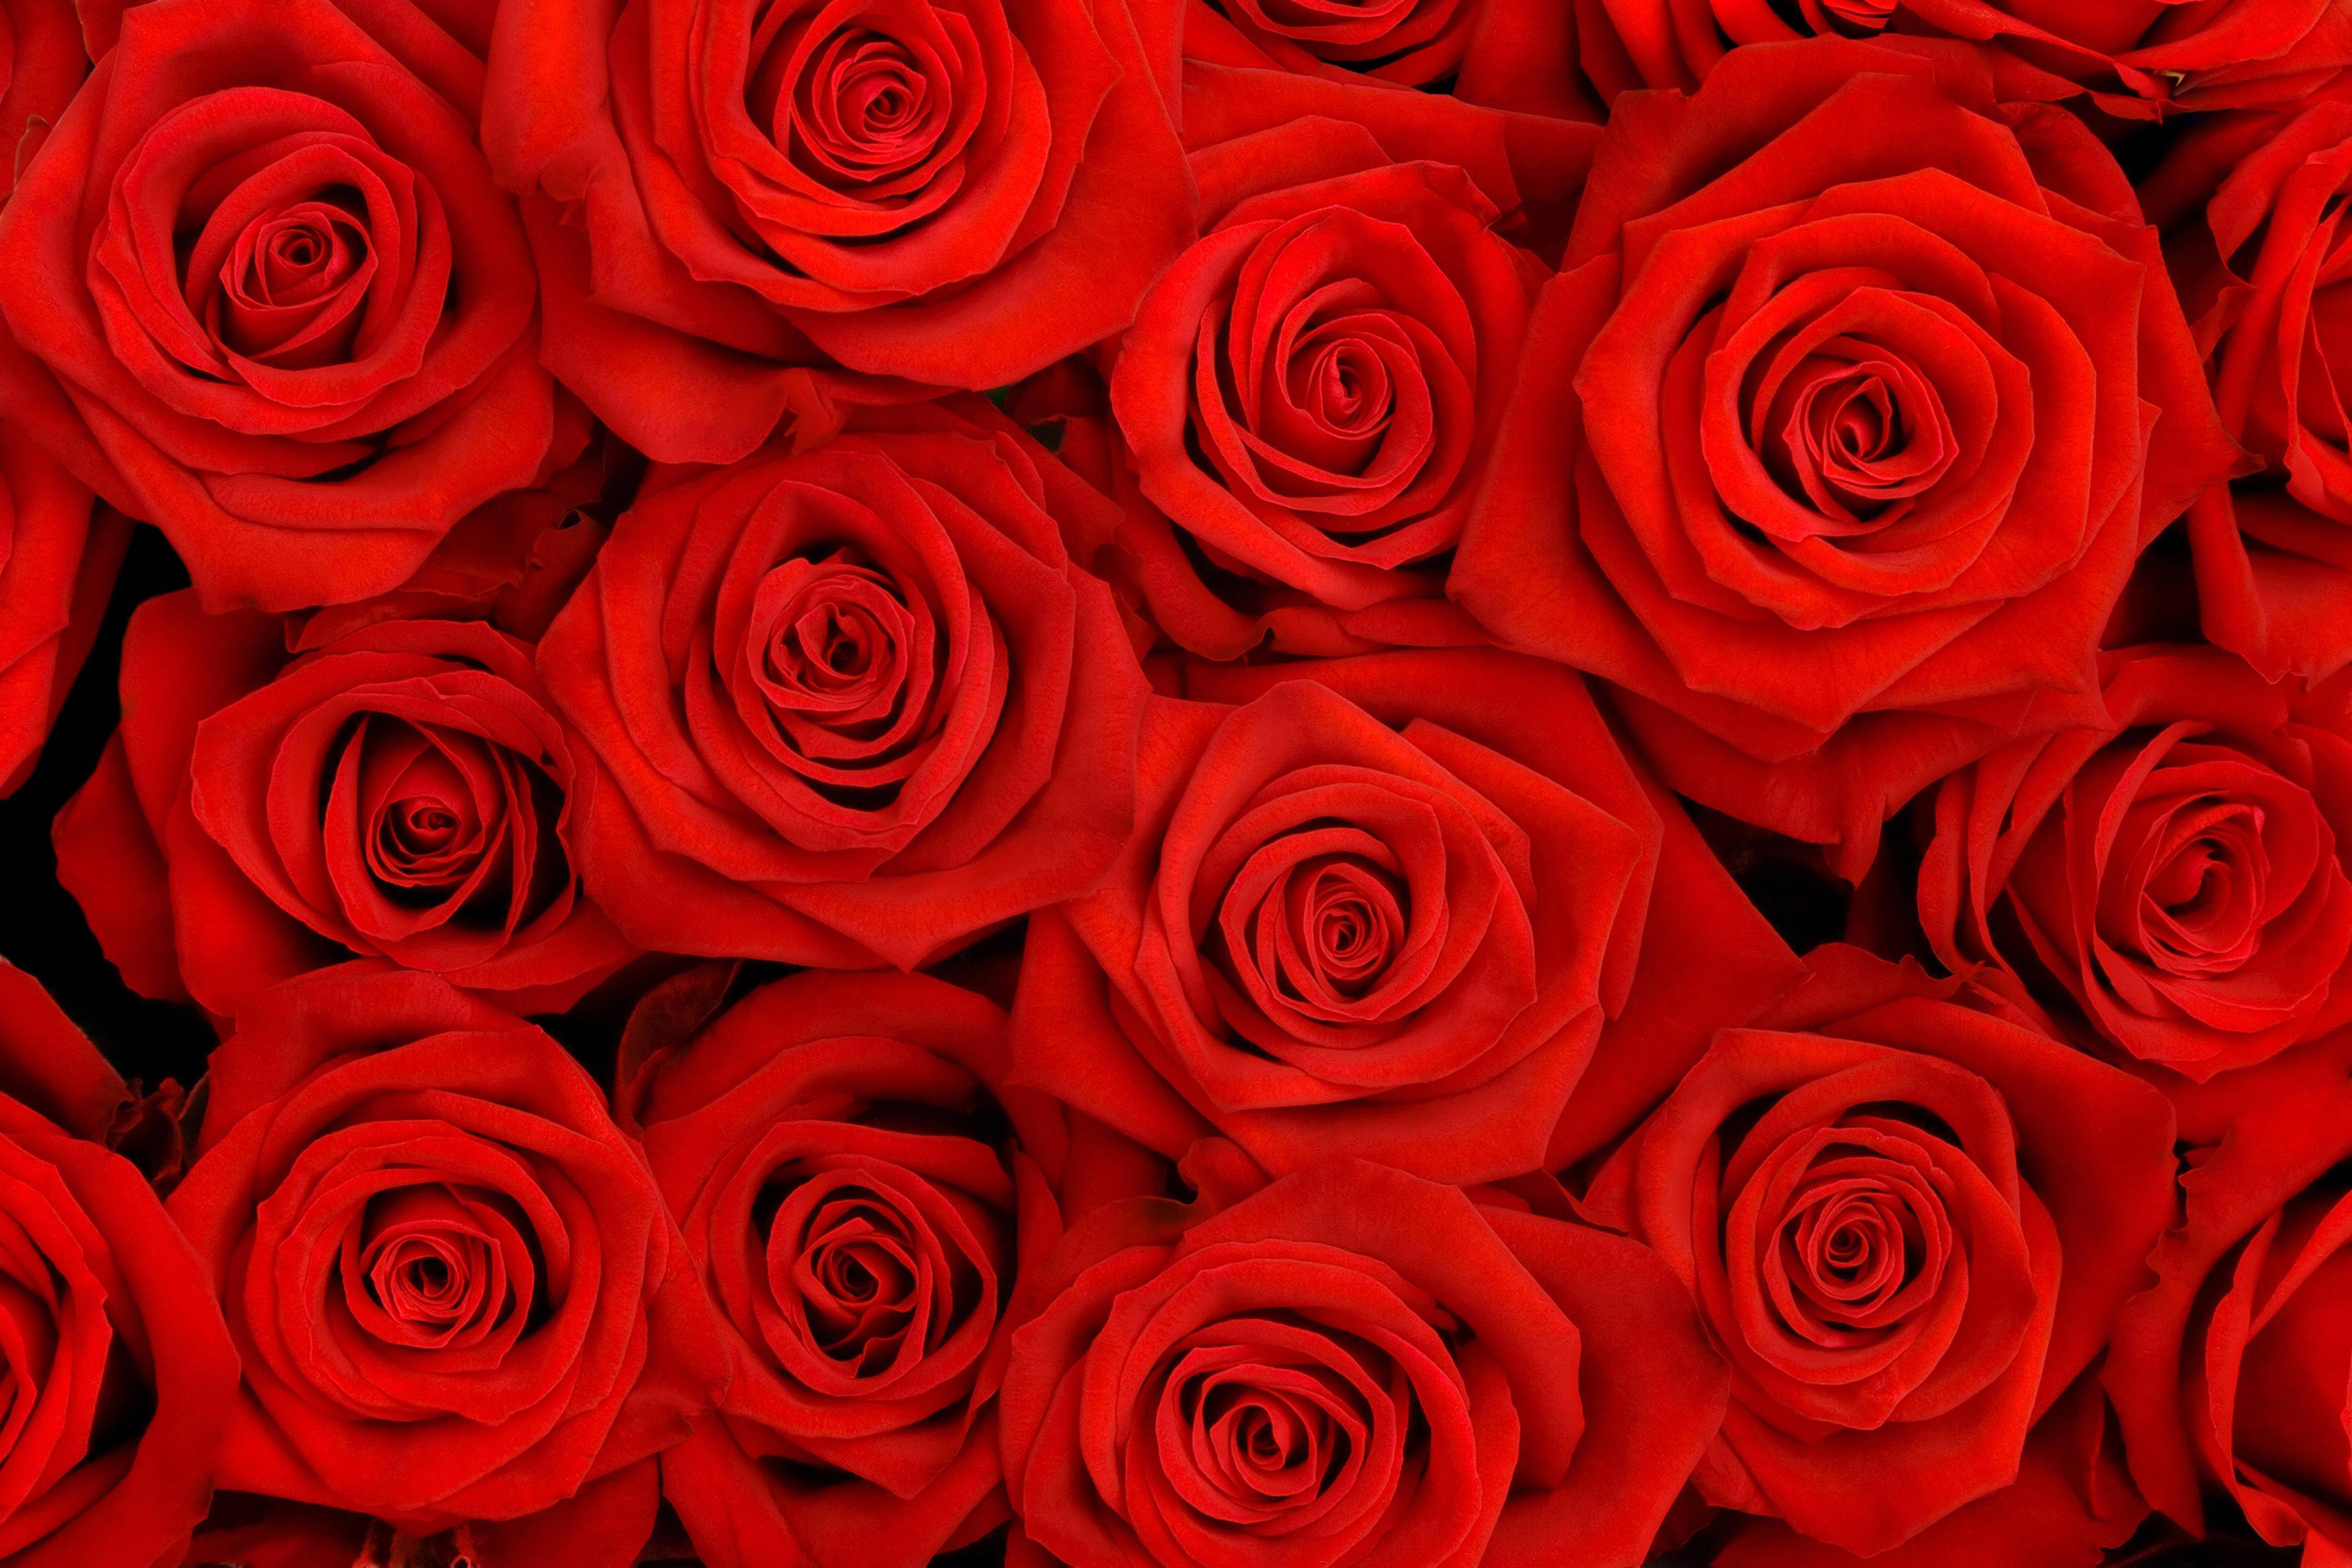 Roses Background Images - Wallpaper Cave